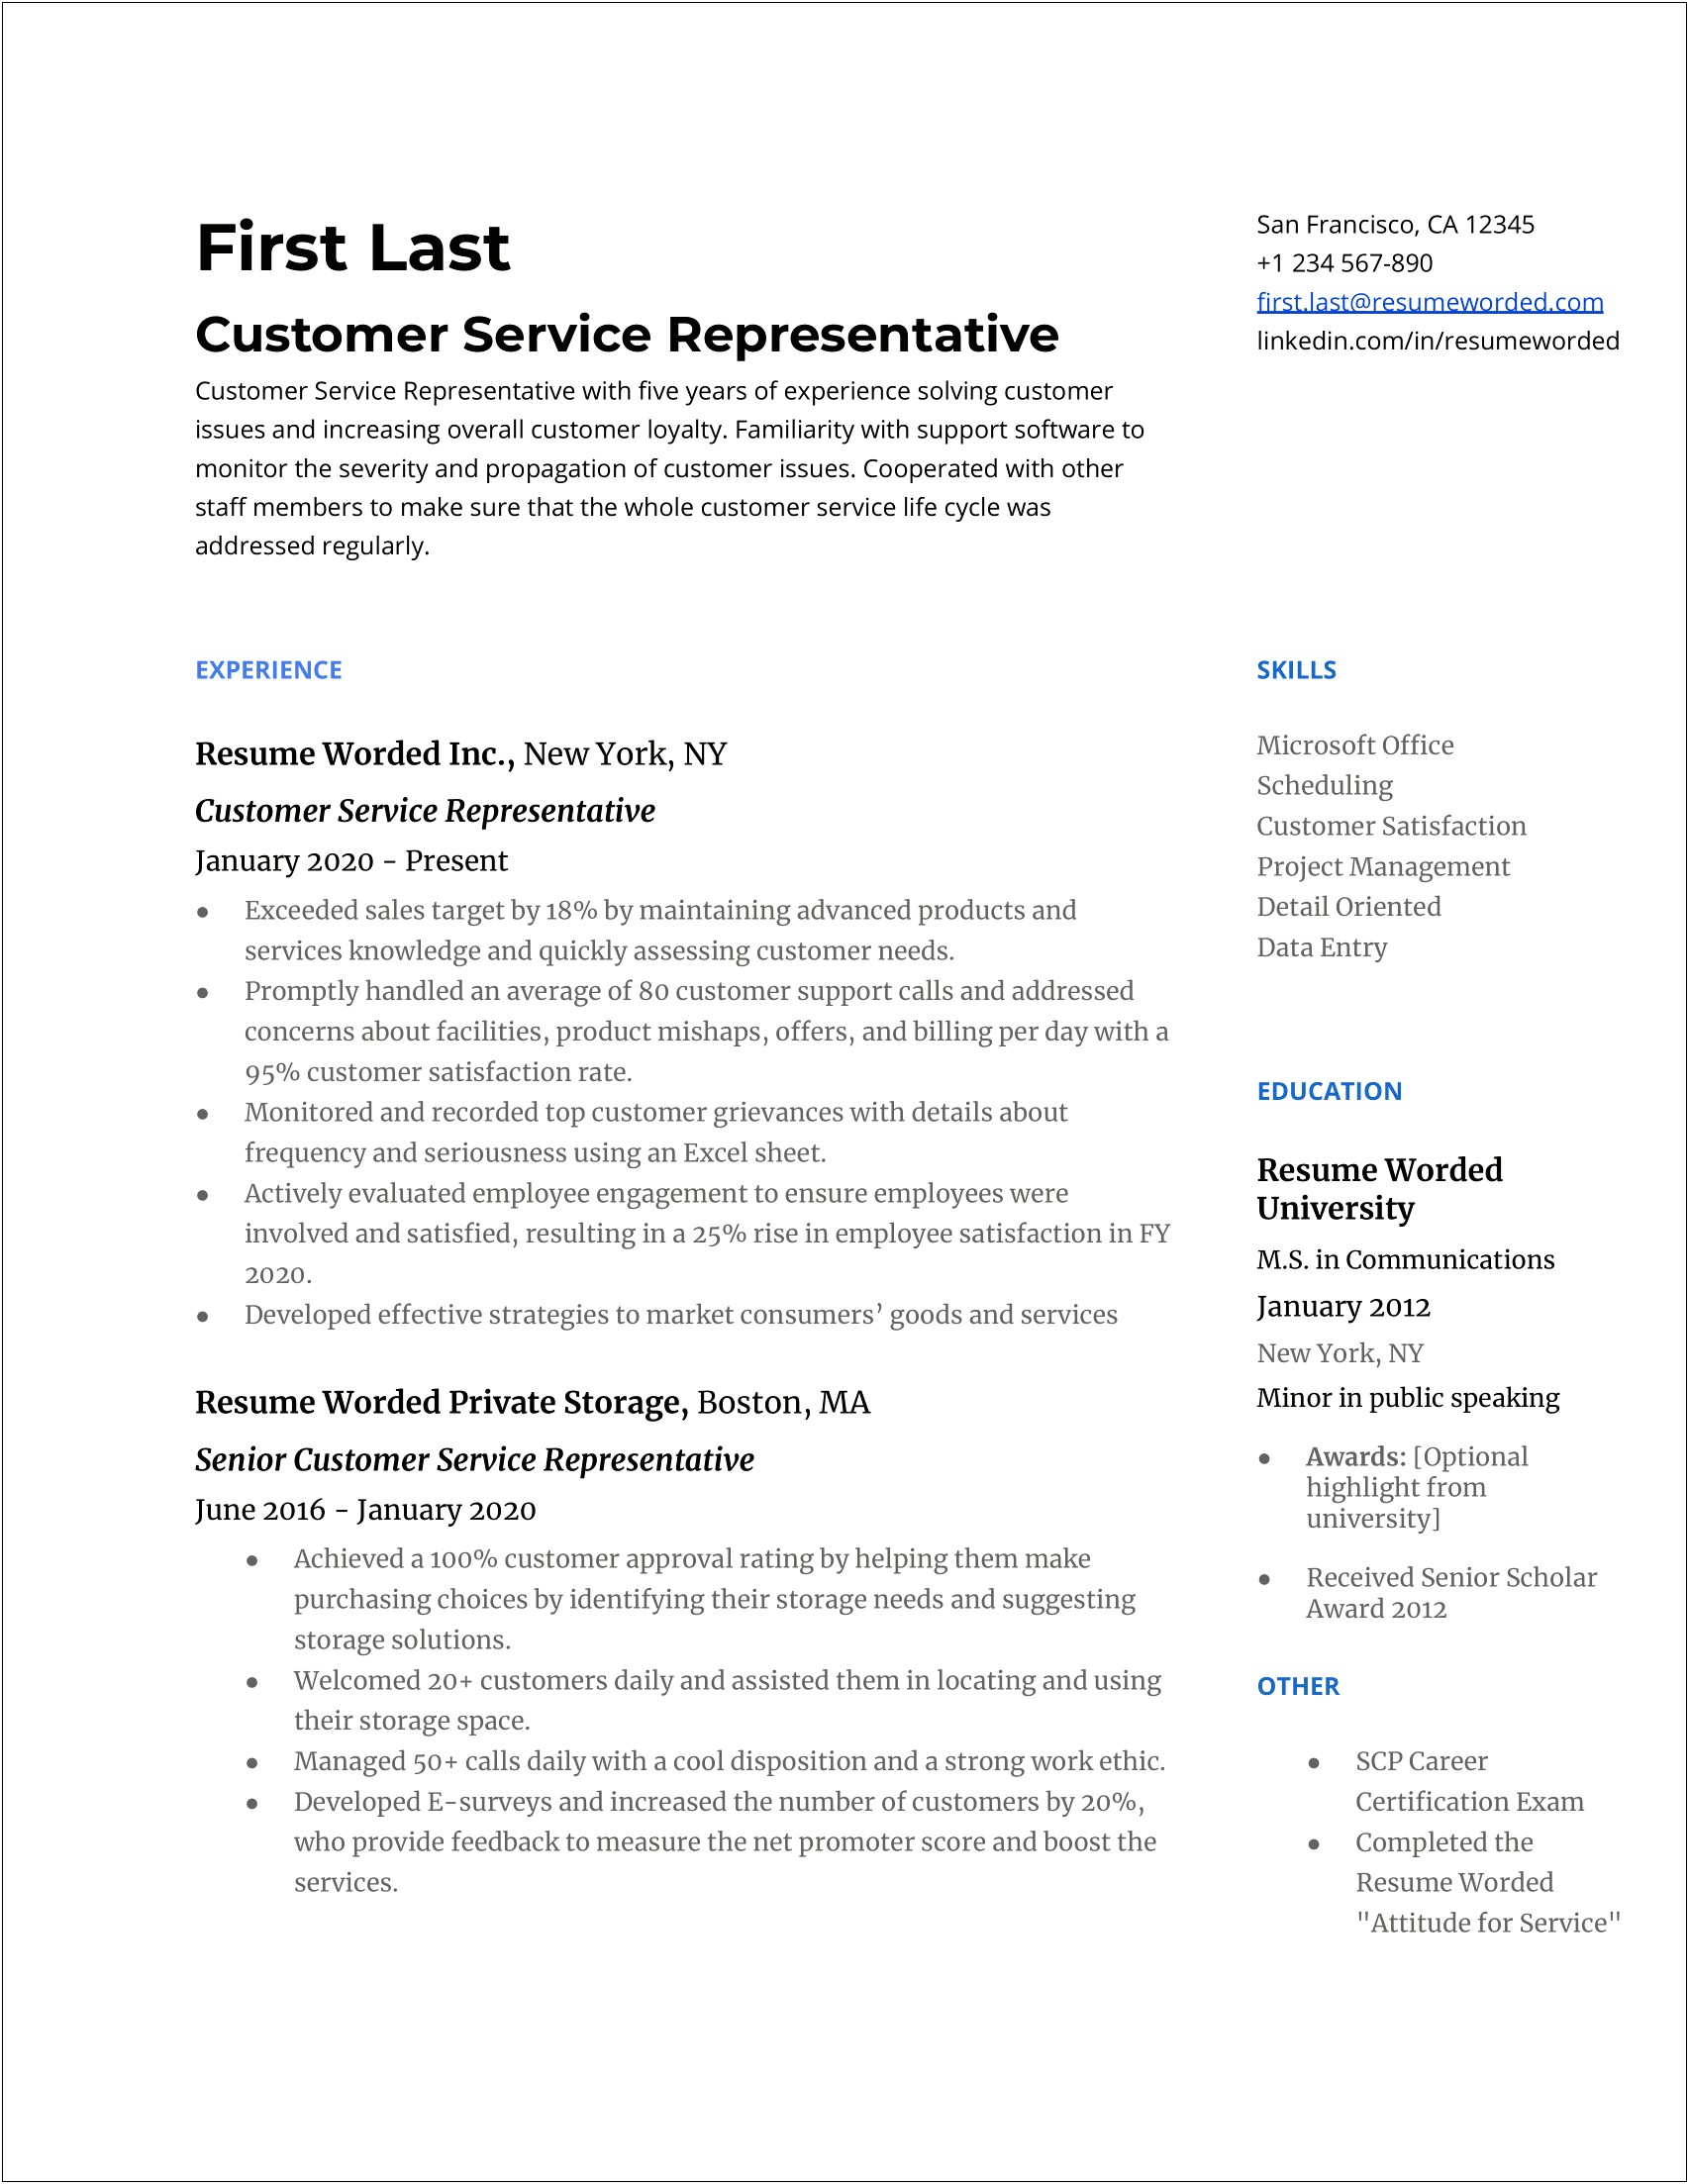 Resume Skills Section Example Customer Service